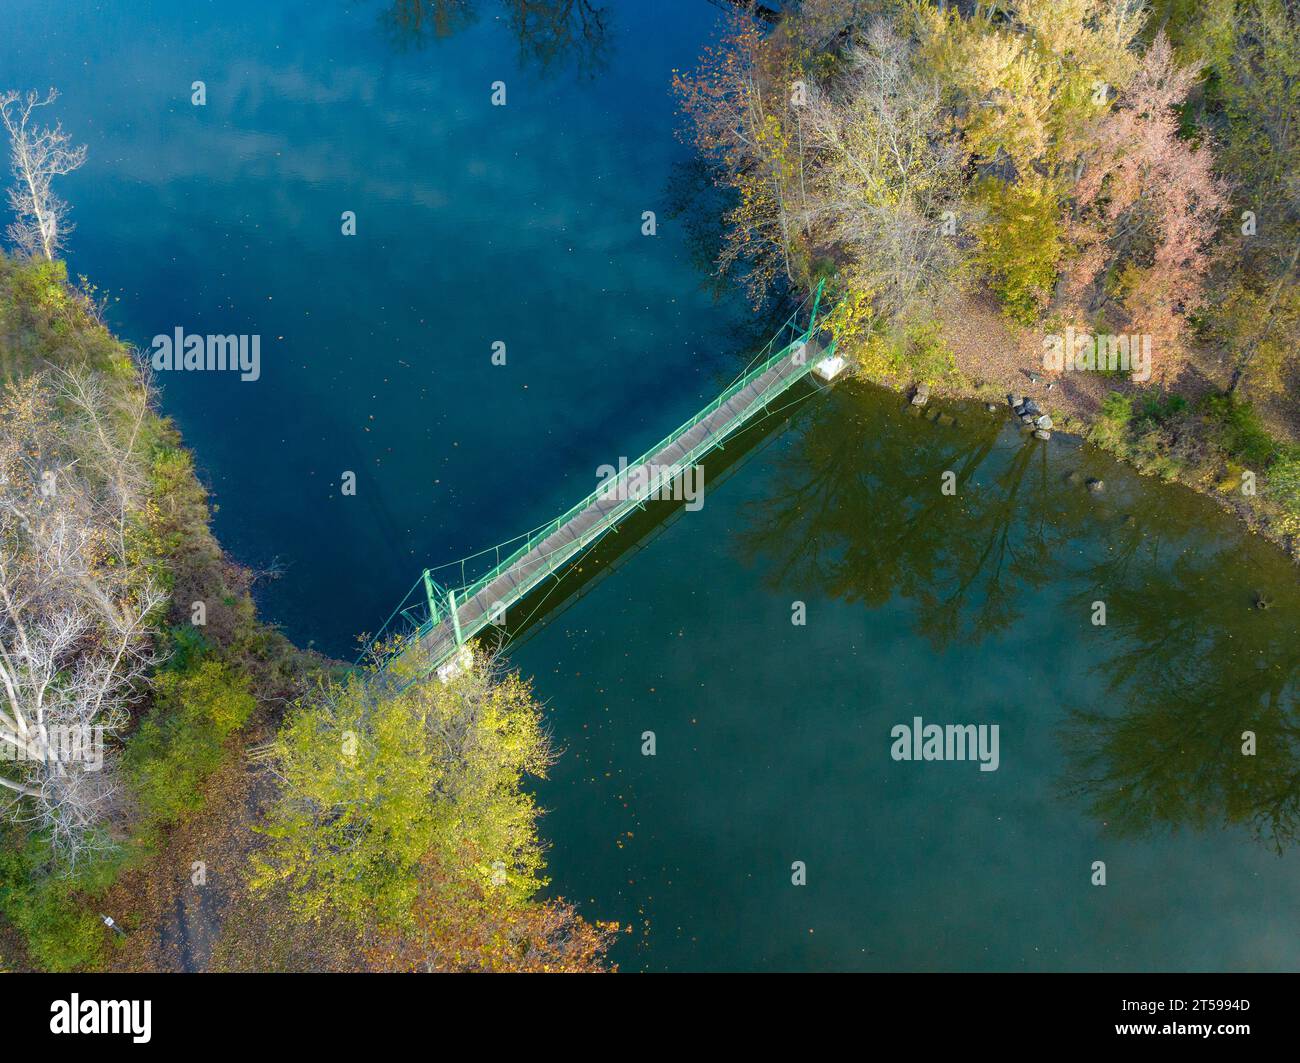 Fall, autumn, drone aerial image with view of Stewart Park at the south end of Cayuga Lake, Ithaca New York. Stock Photo